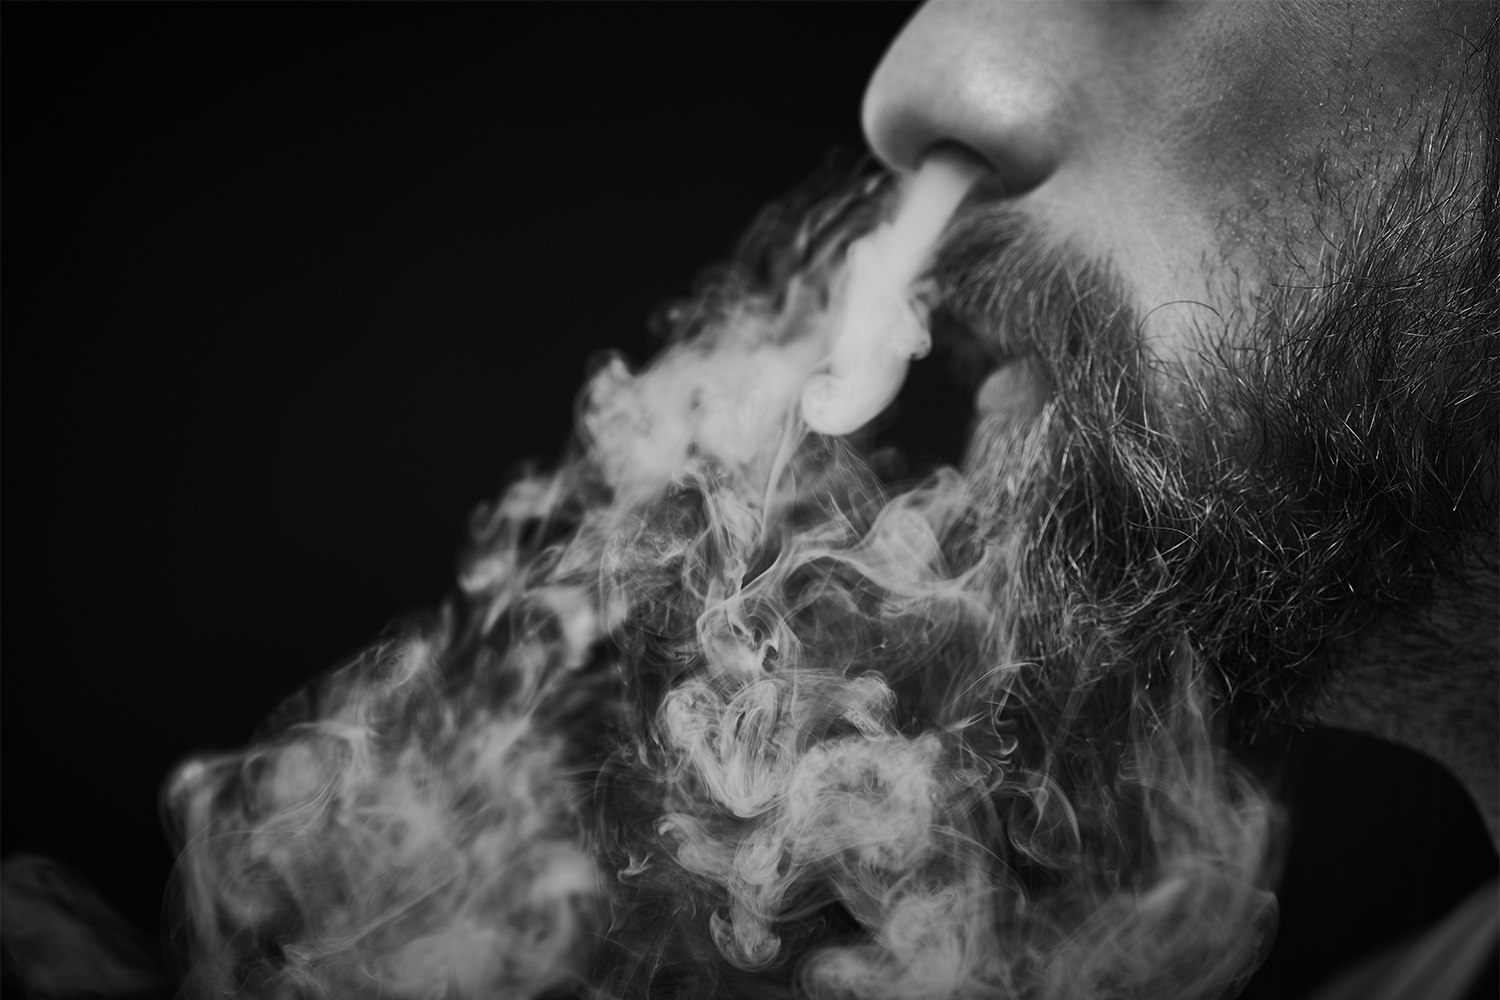 https://nyulangone.org/news/sites/default/files/2022-02/press-release-vapers-hookah-smokers-exhale-through-nose-more-than-cigarette-smokers.jpg